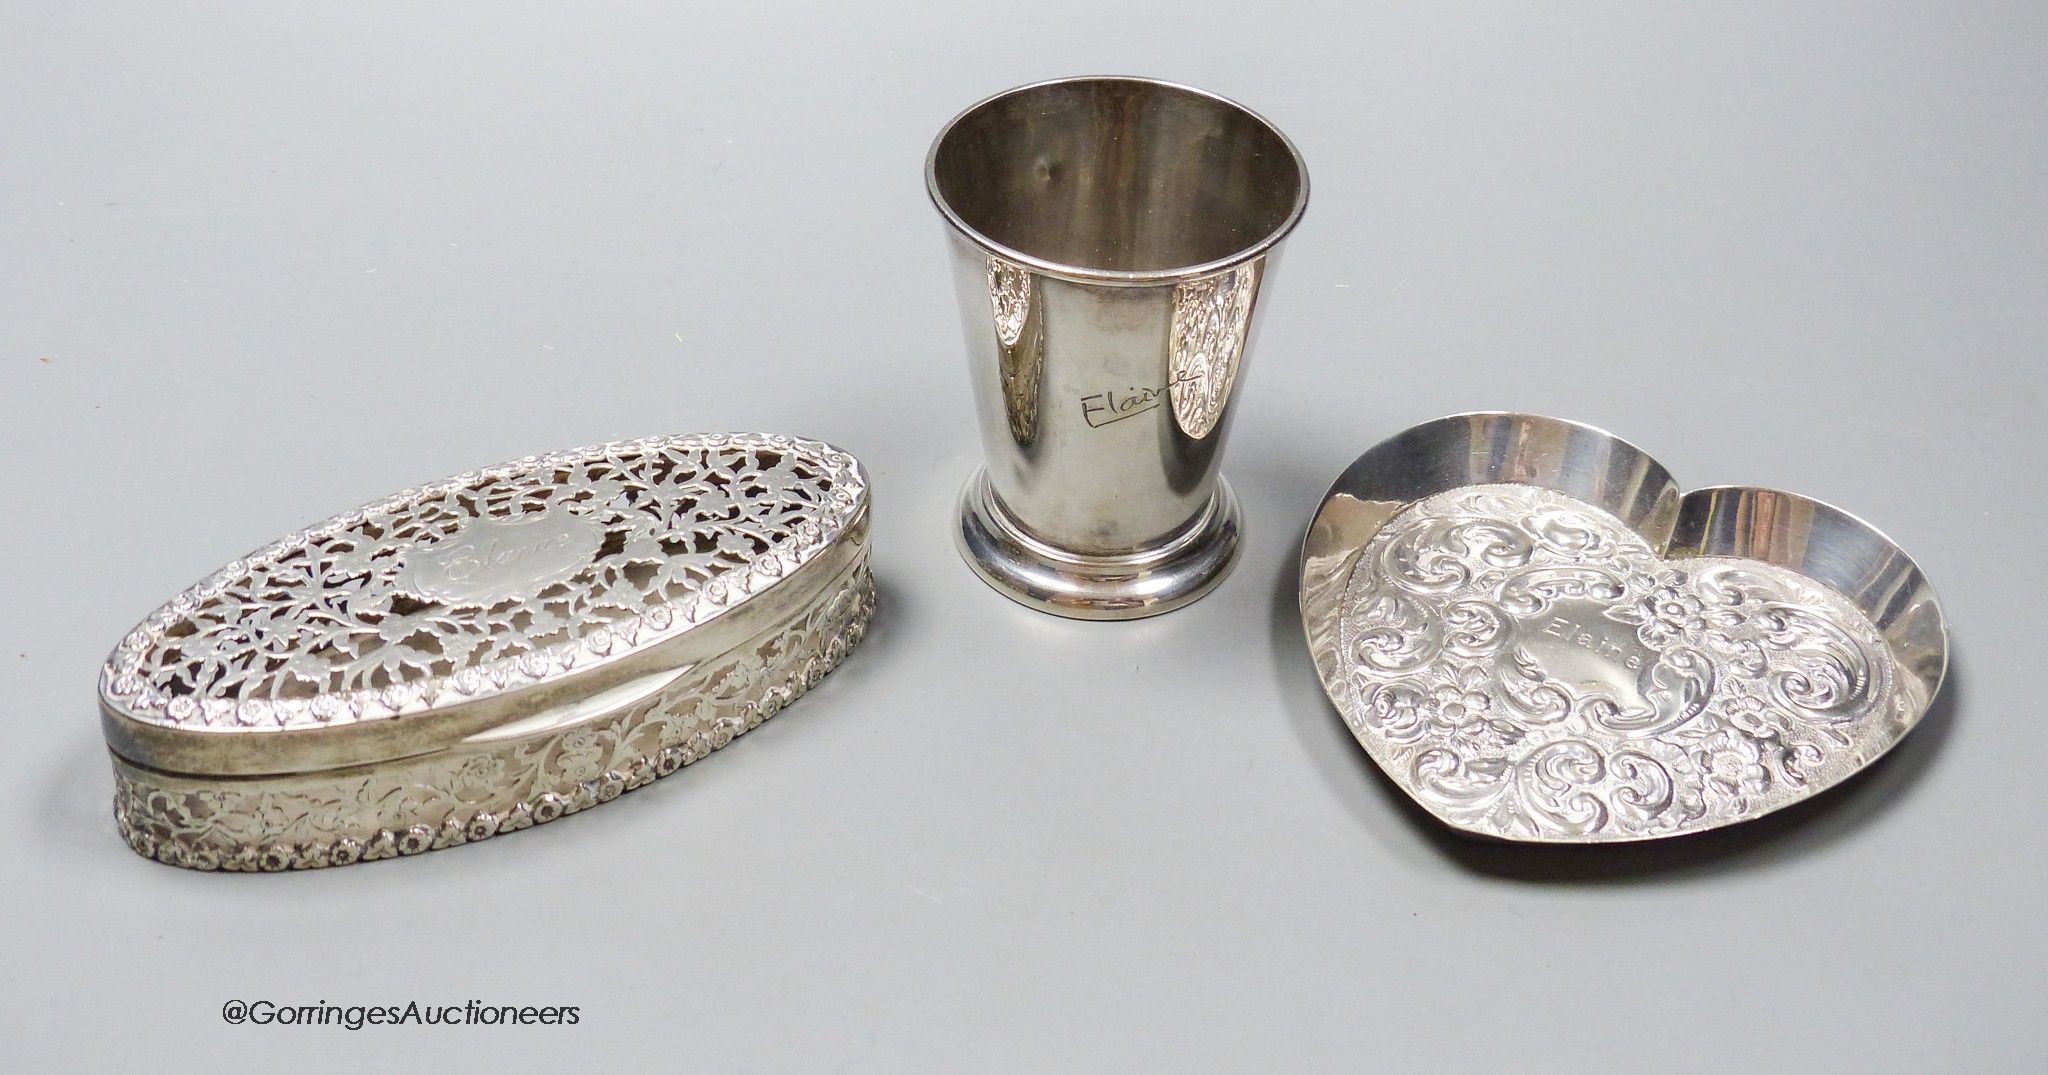 An Edwardian pierced silver oval pot pourri box, Chester, 1909,13.6cm a silver heart shaped pin tray and a silver beaker, all engraved with the name Elaine, 8oz.